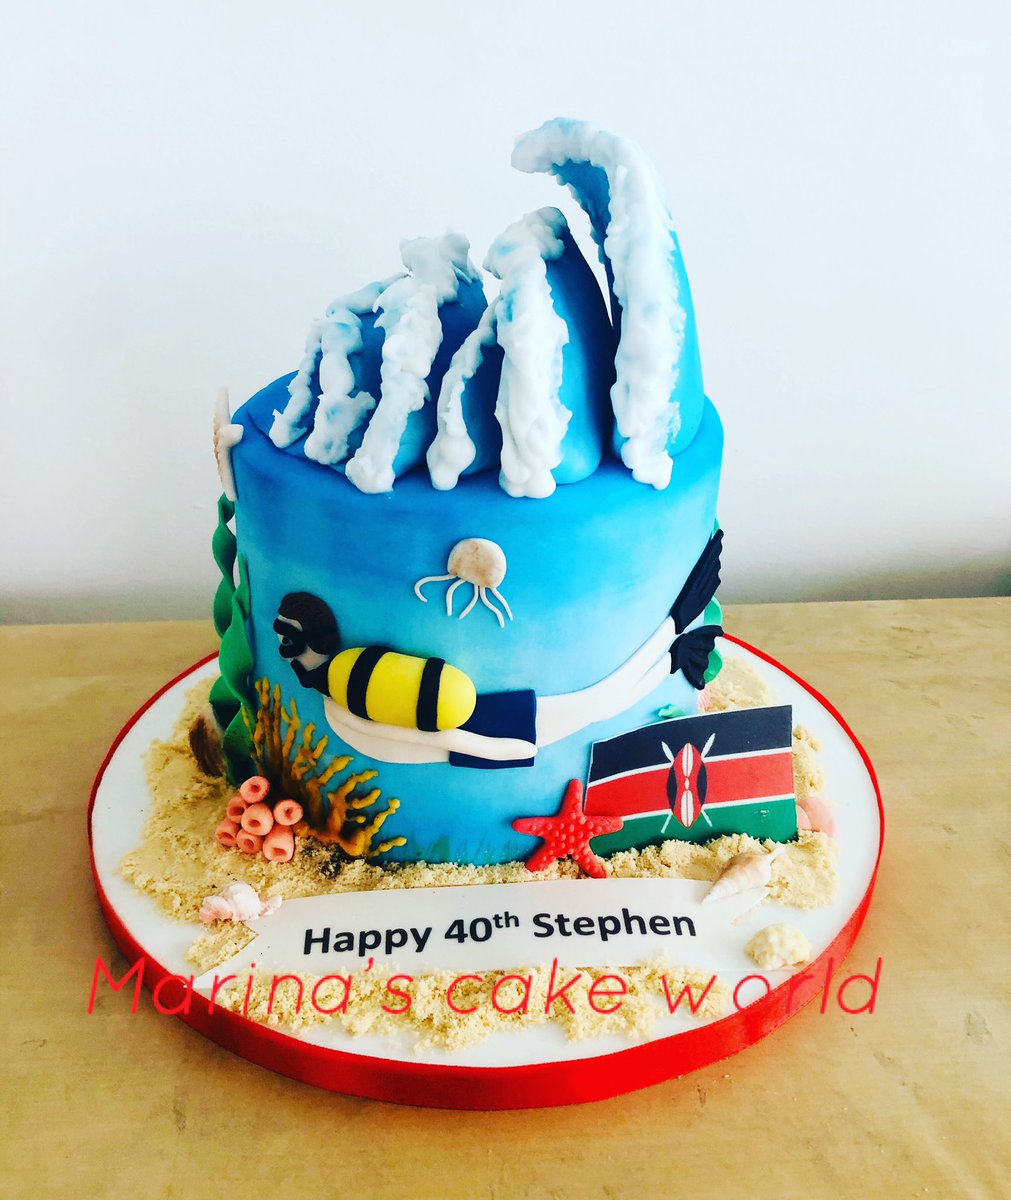 #40thbirthday celebration in #Kenya #diving in the #bigbluesea and a cake to remind the lovely #experience. I wish I was there too...! 

#scubadiving #divingcake #scubadiver #scubadivercake #sea #kenyascubadivers #kenyadiving #marinascakeworld #canarywharf #isleofdogs #greeksinuk